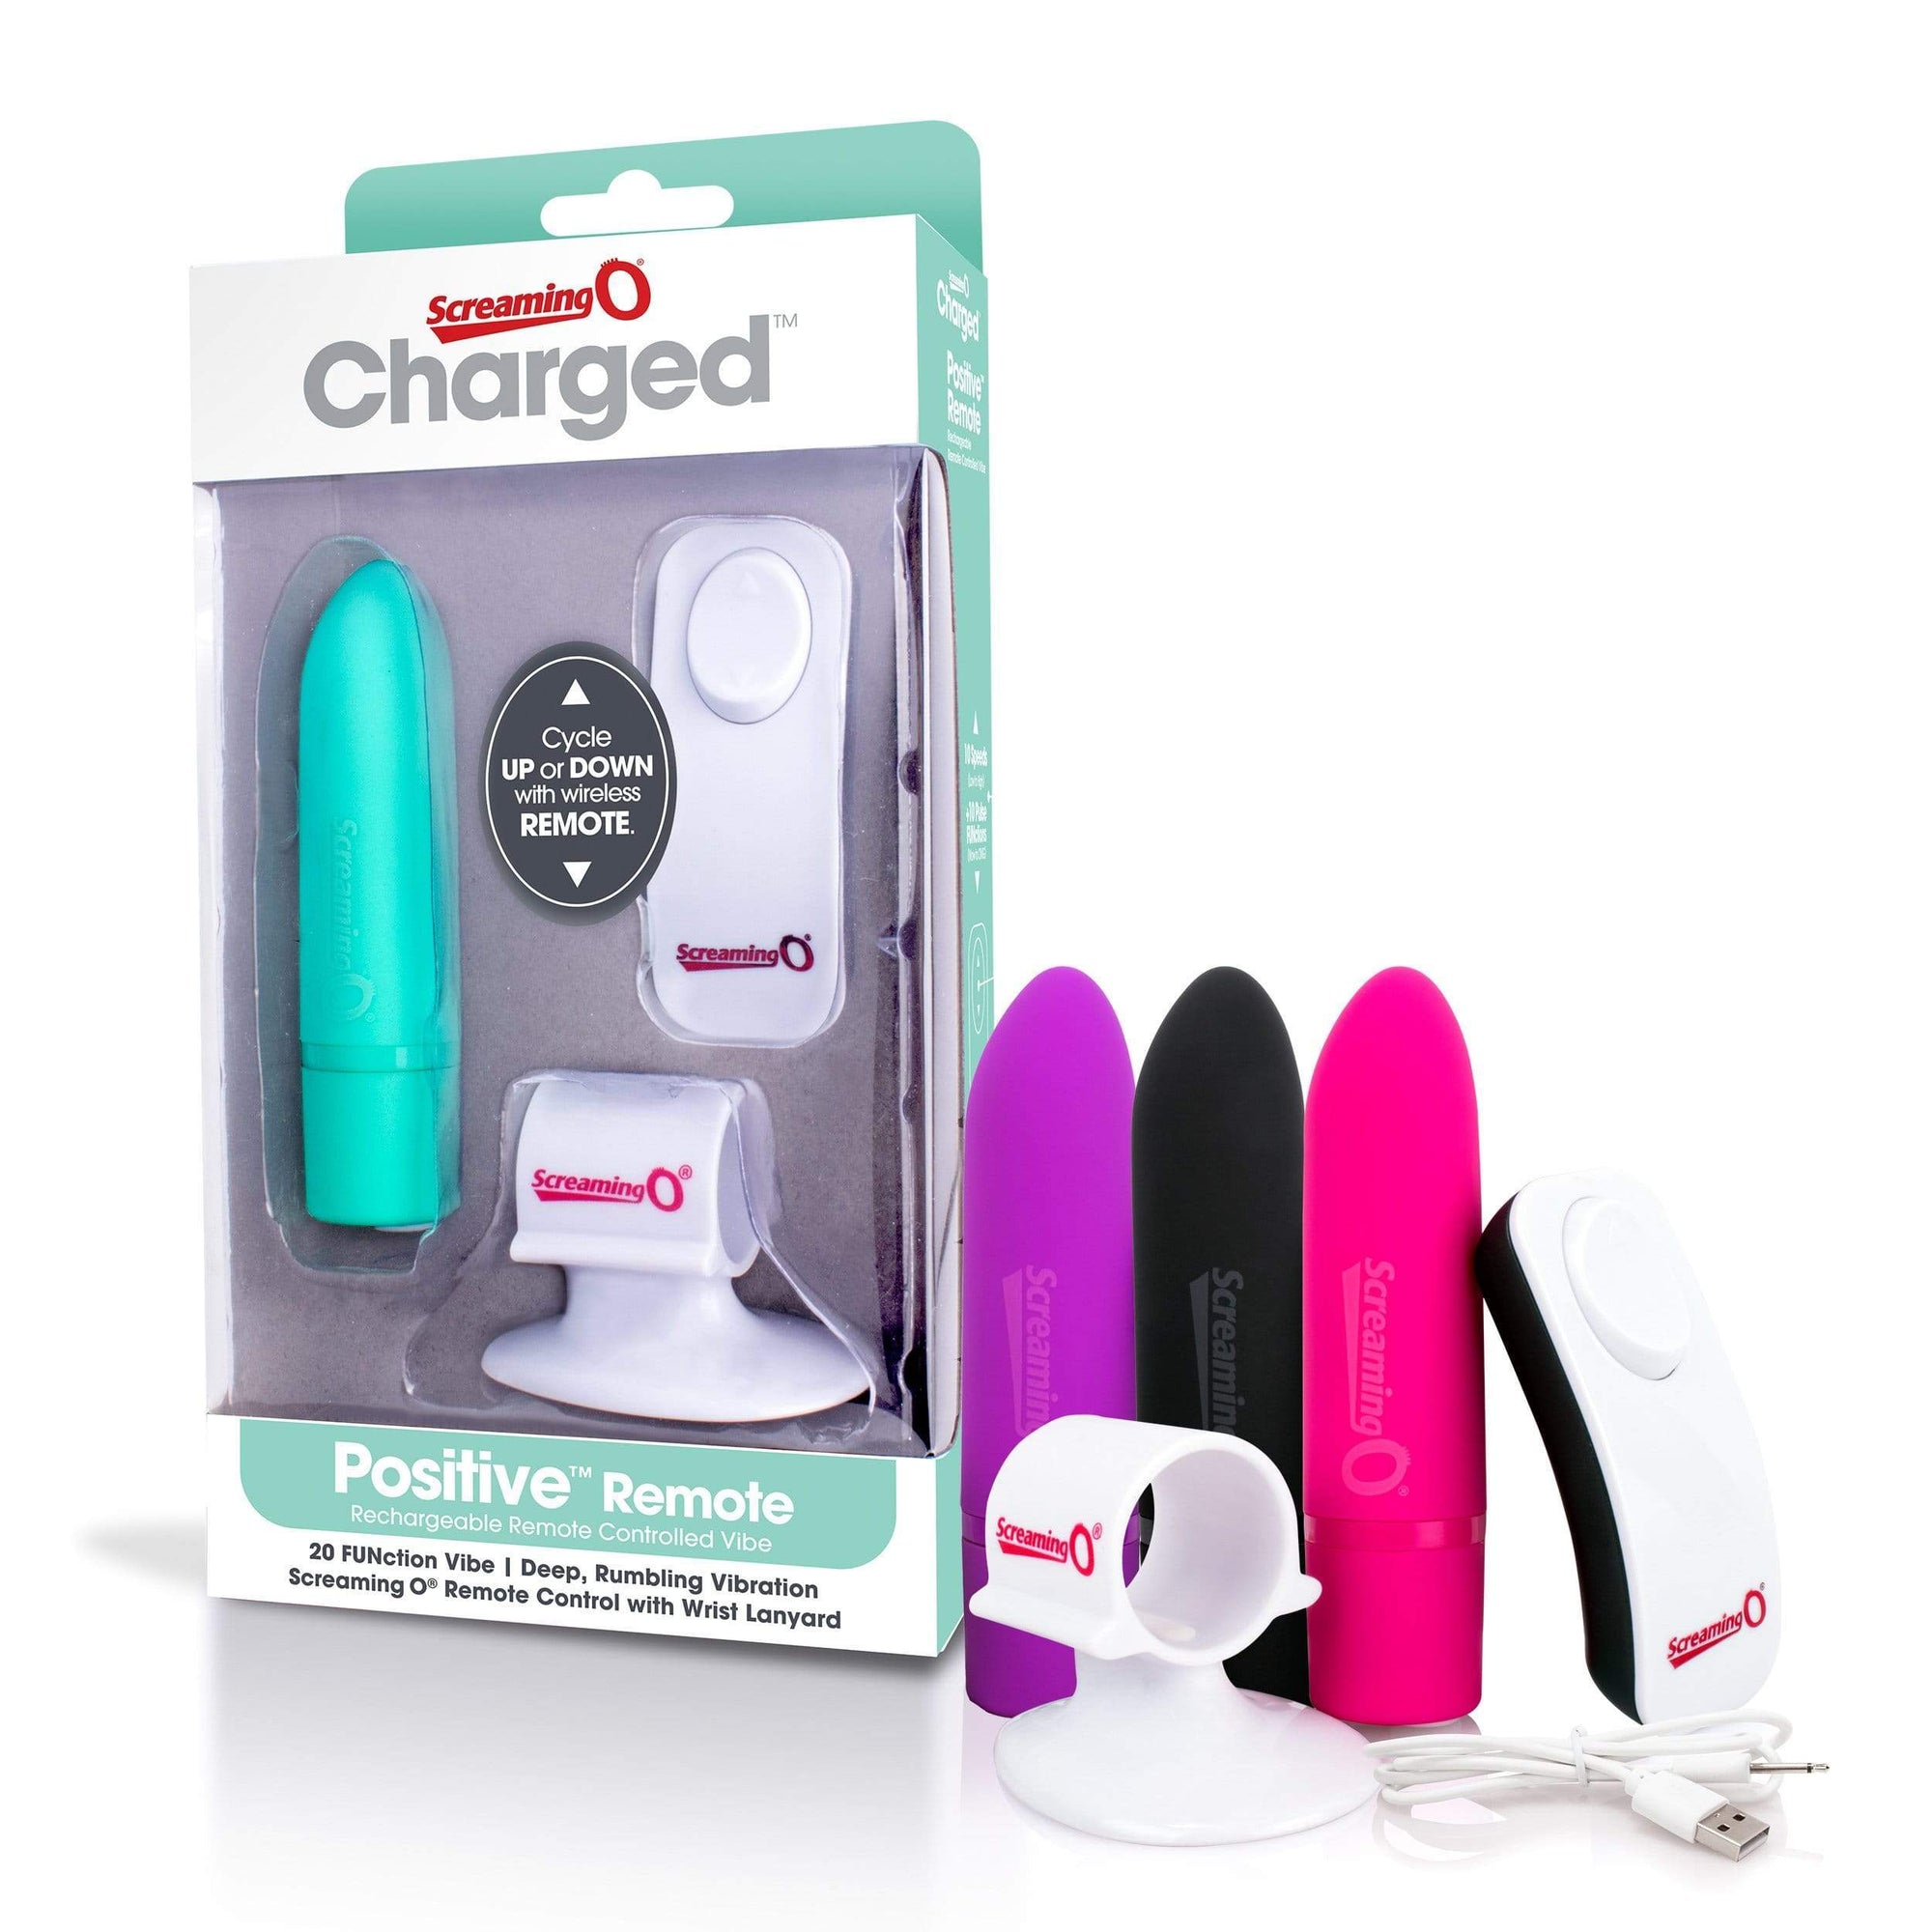 TheScreamingO - Charged Positive Remote Control Vibrator (Black) Bullet (Vibration) Rechargeable